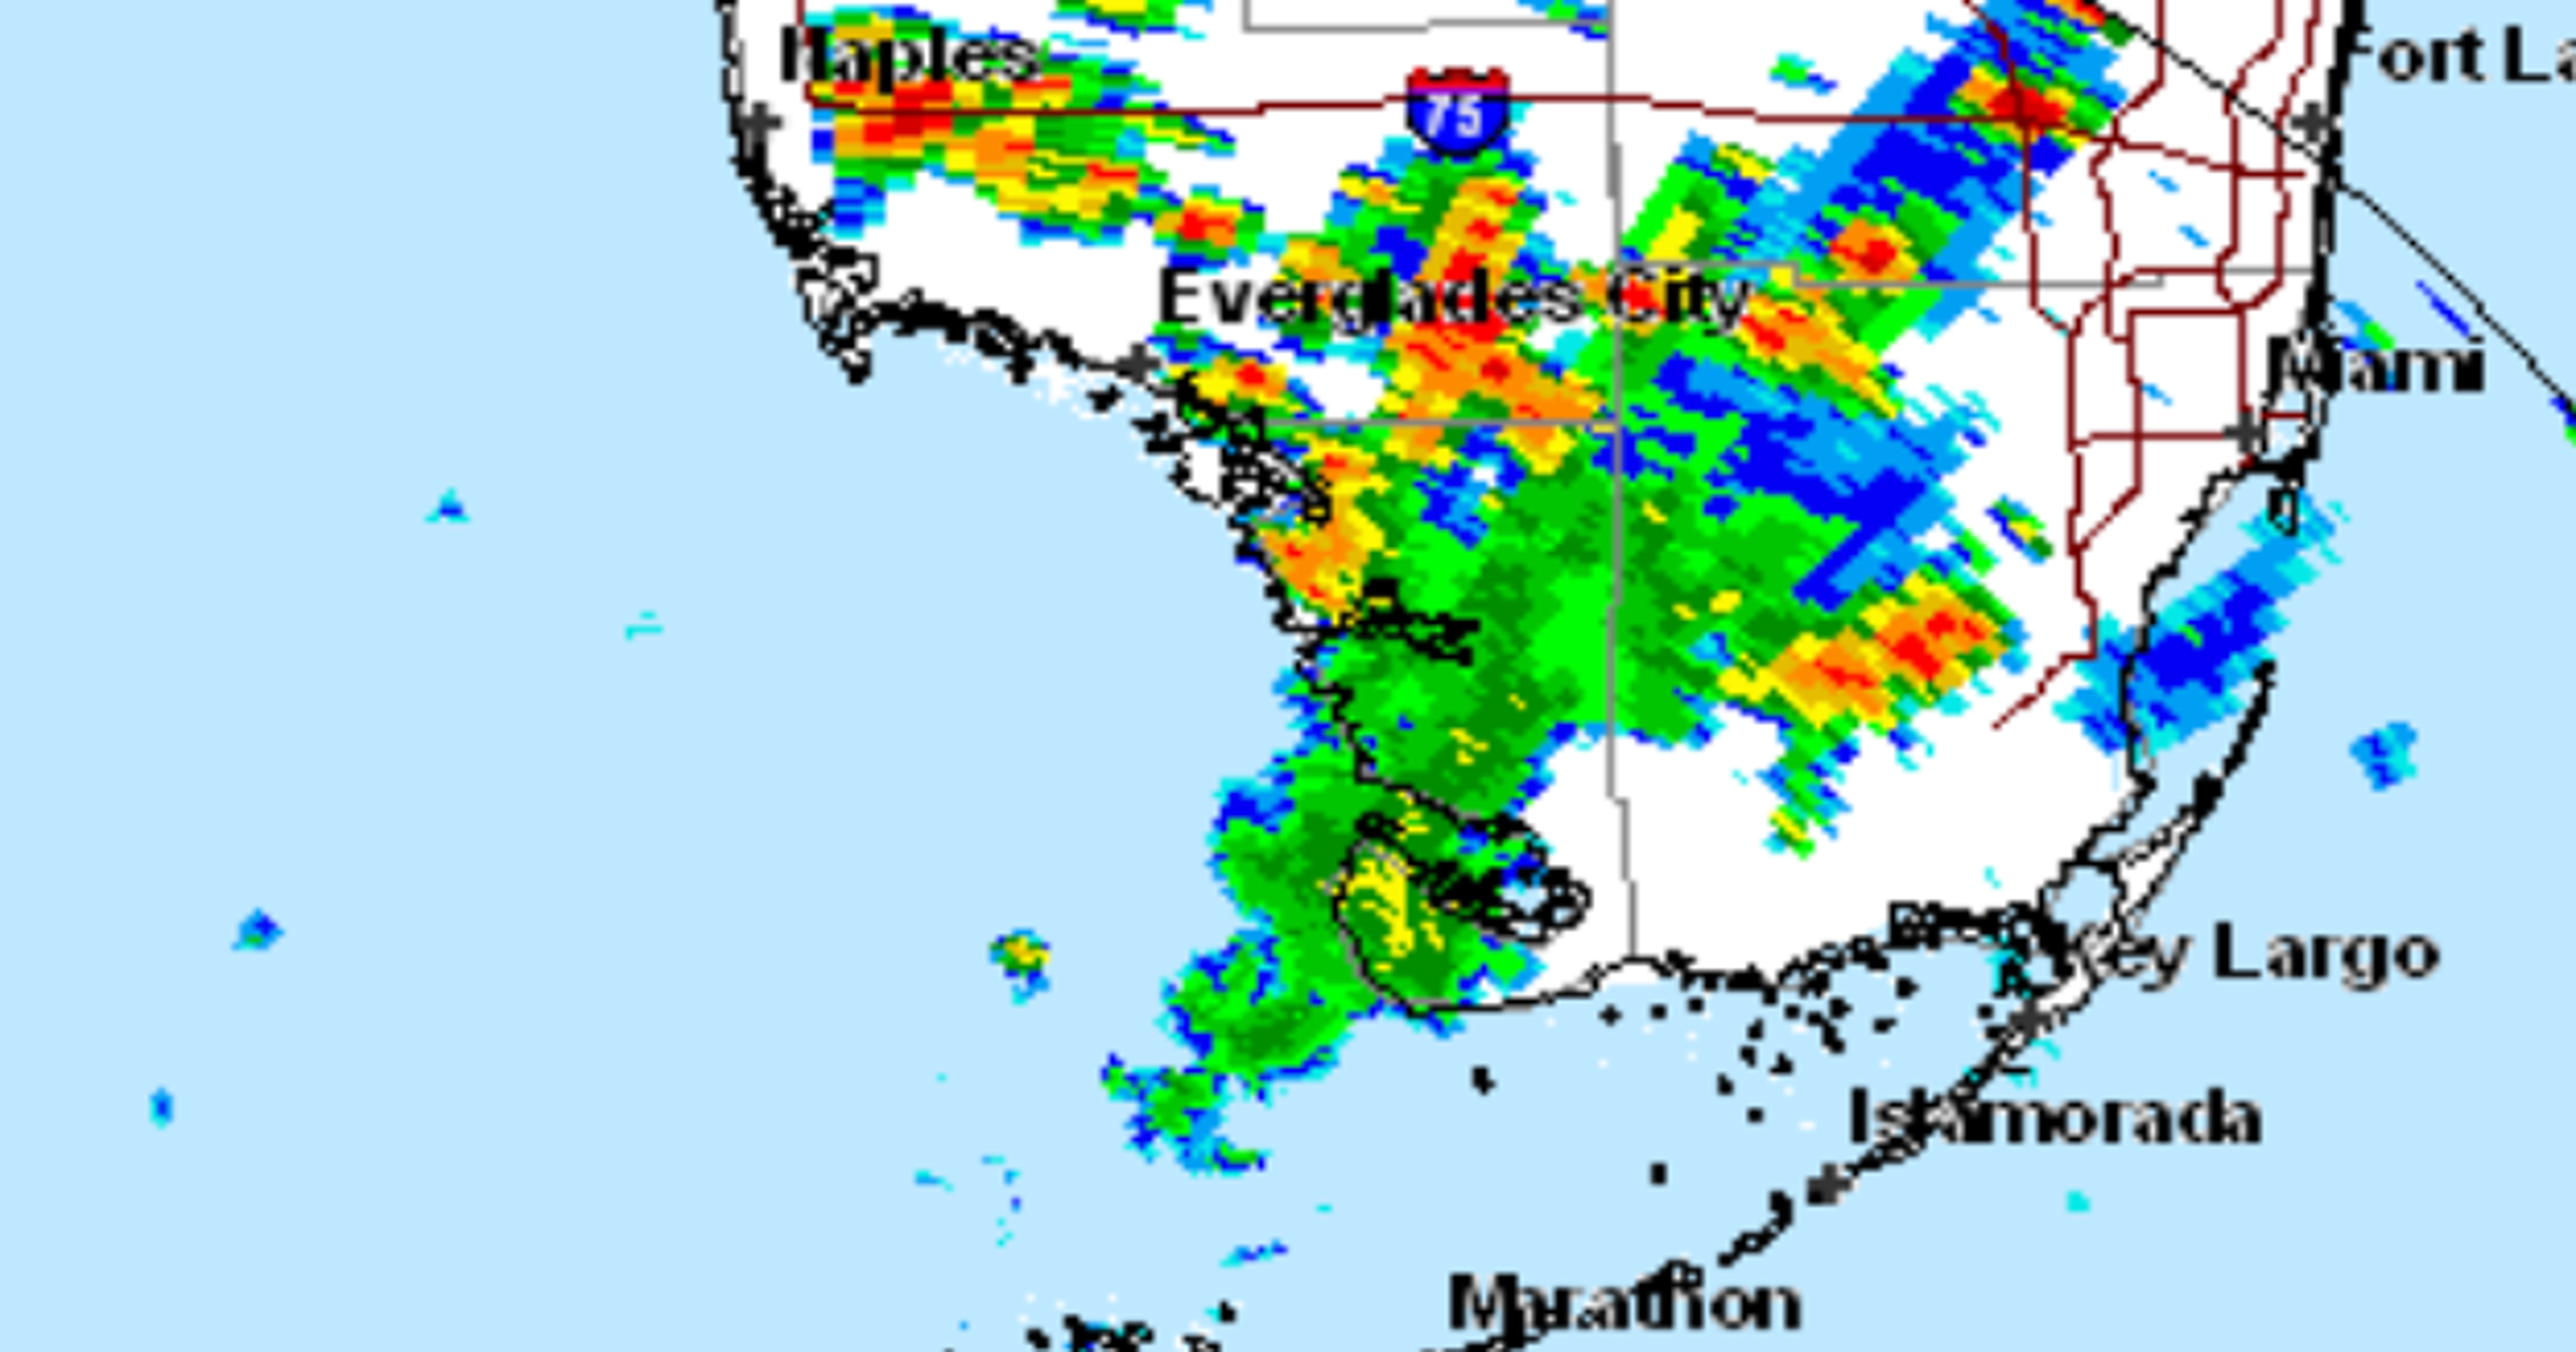 Weather Radar For Inclement Weather Southwest Florida